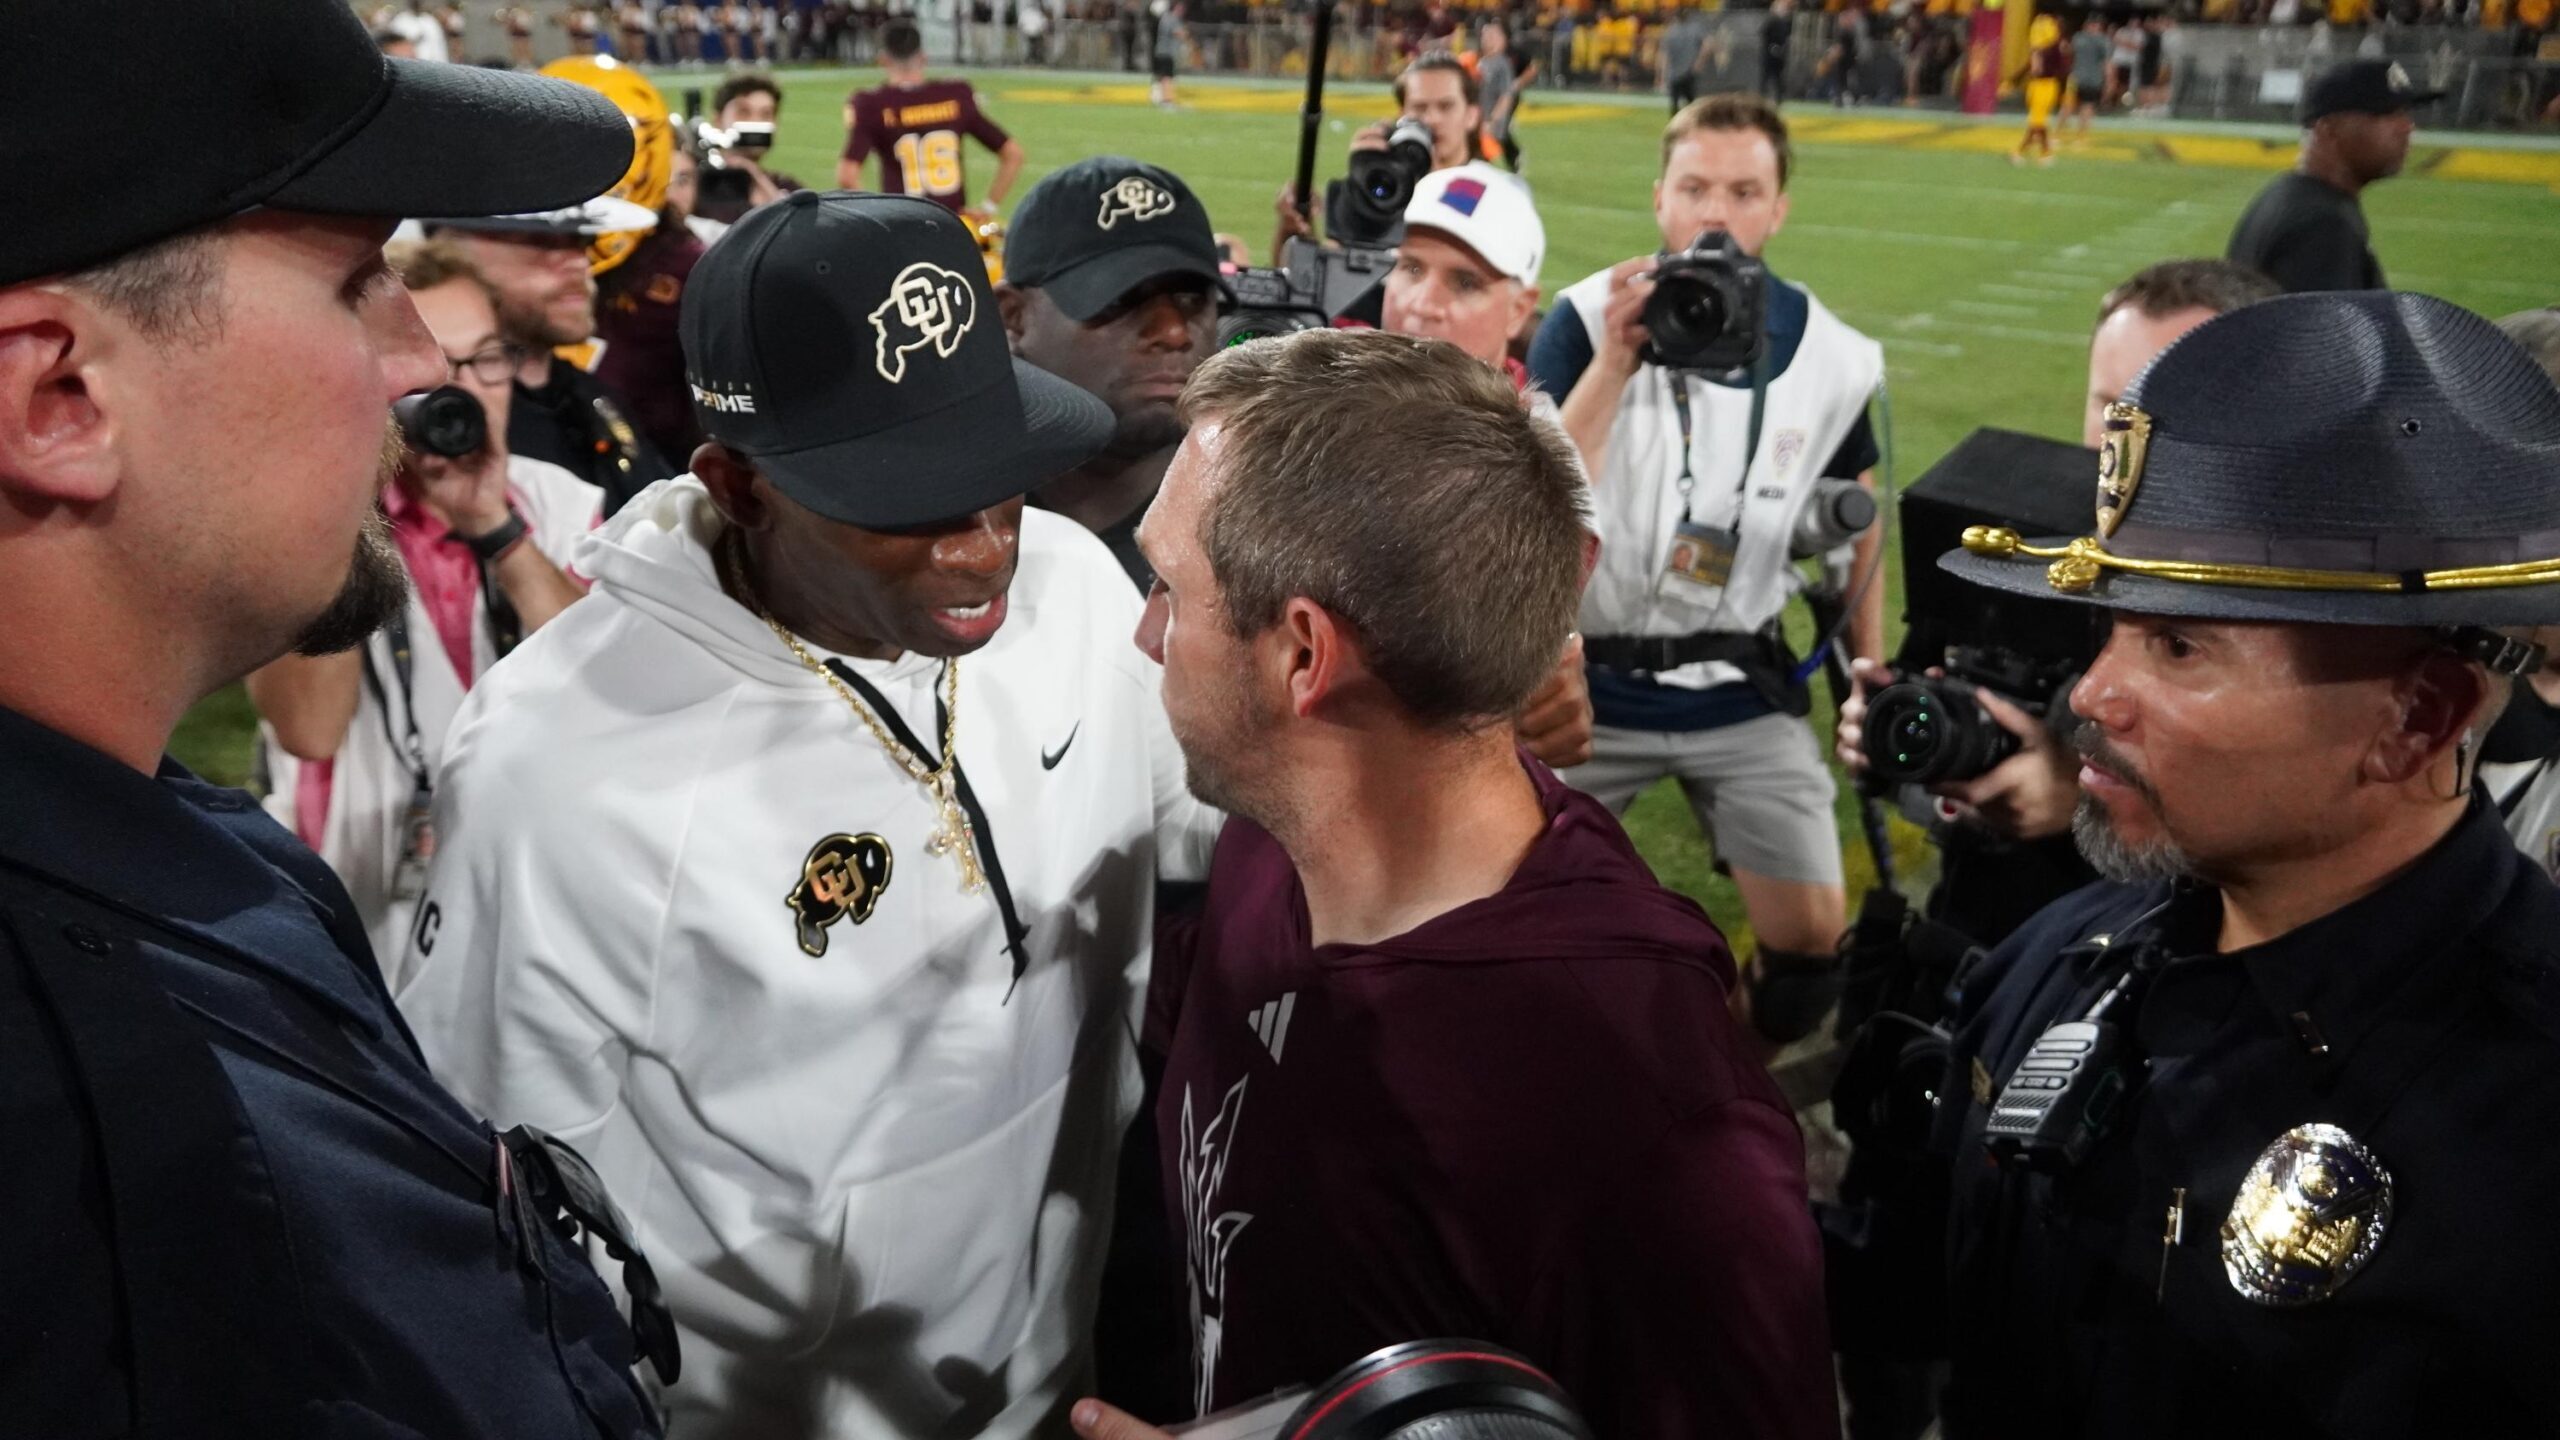 Arizona State falls just short of win over Coach Prime and Colorado